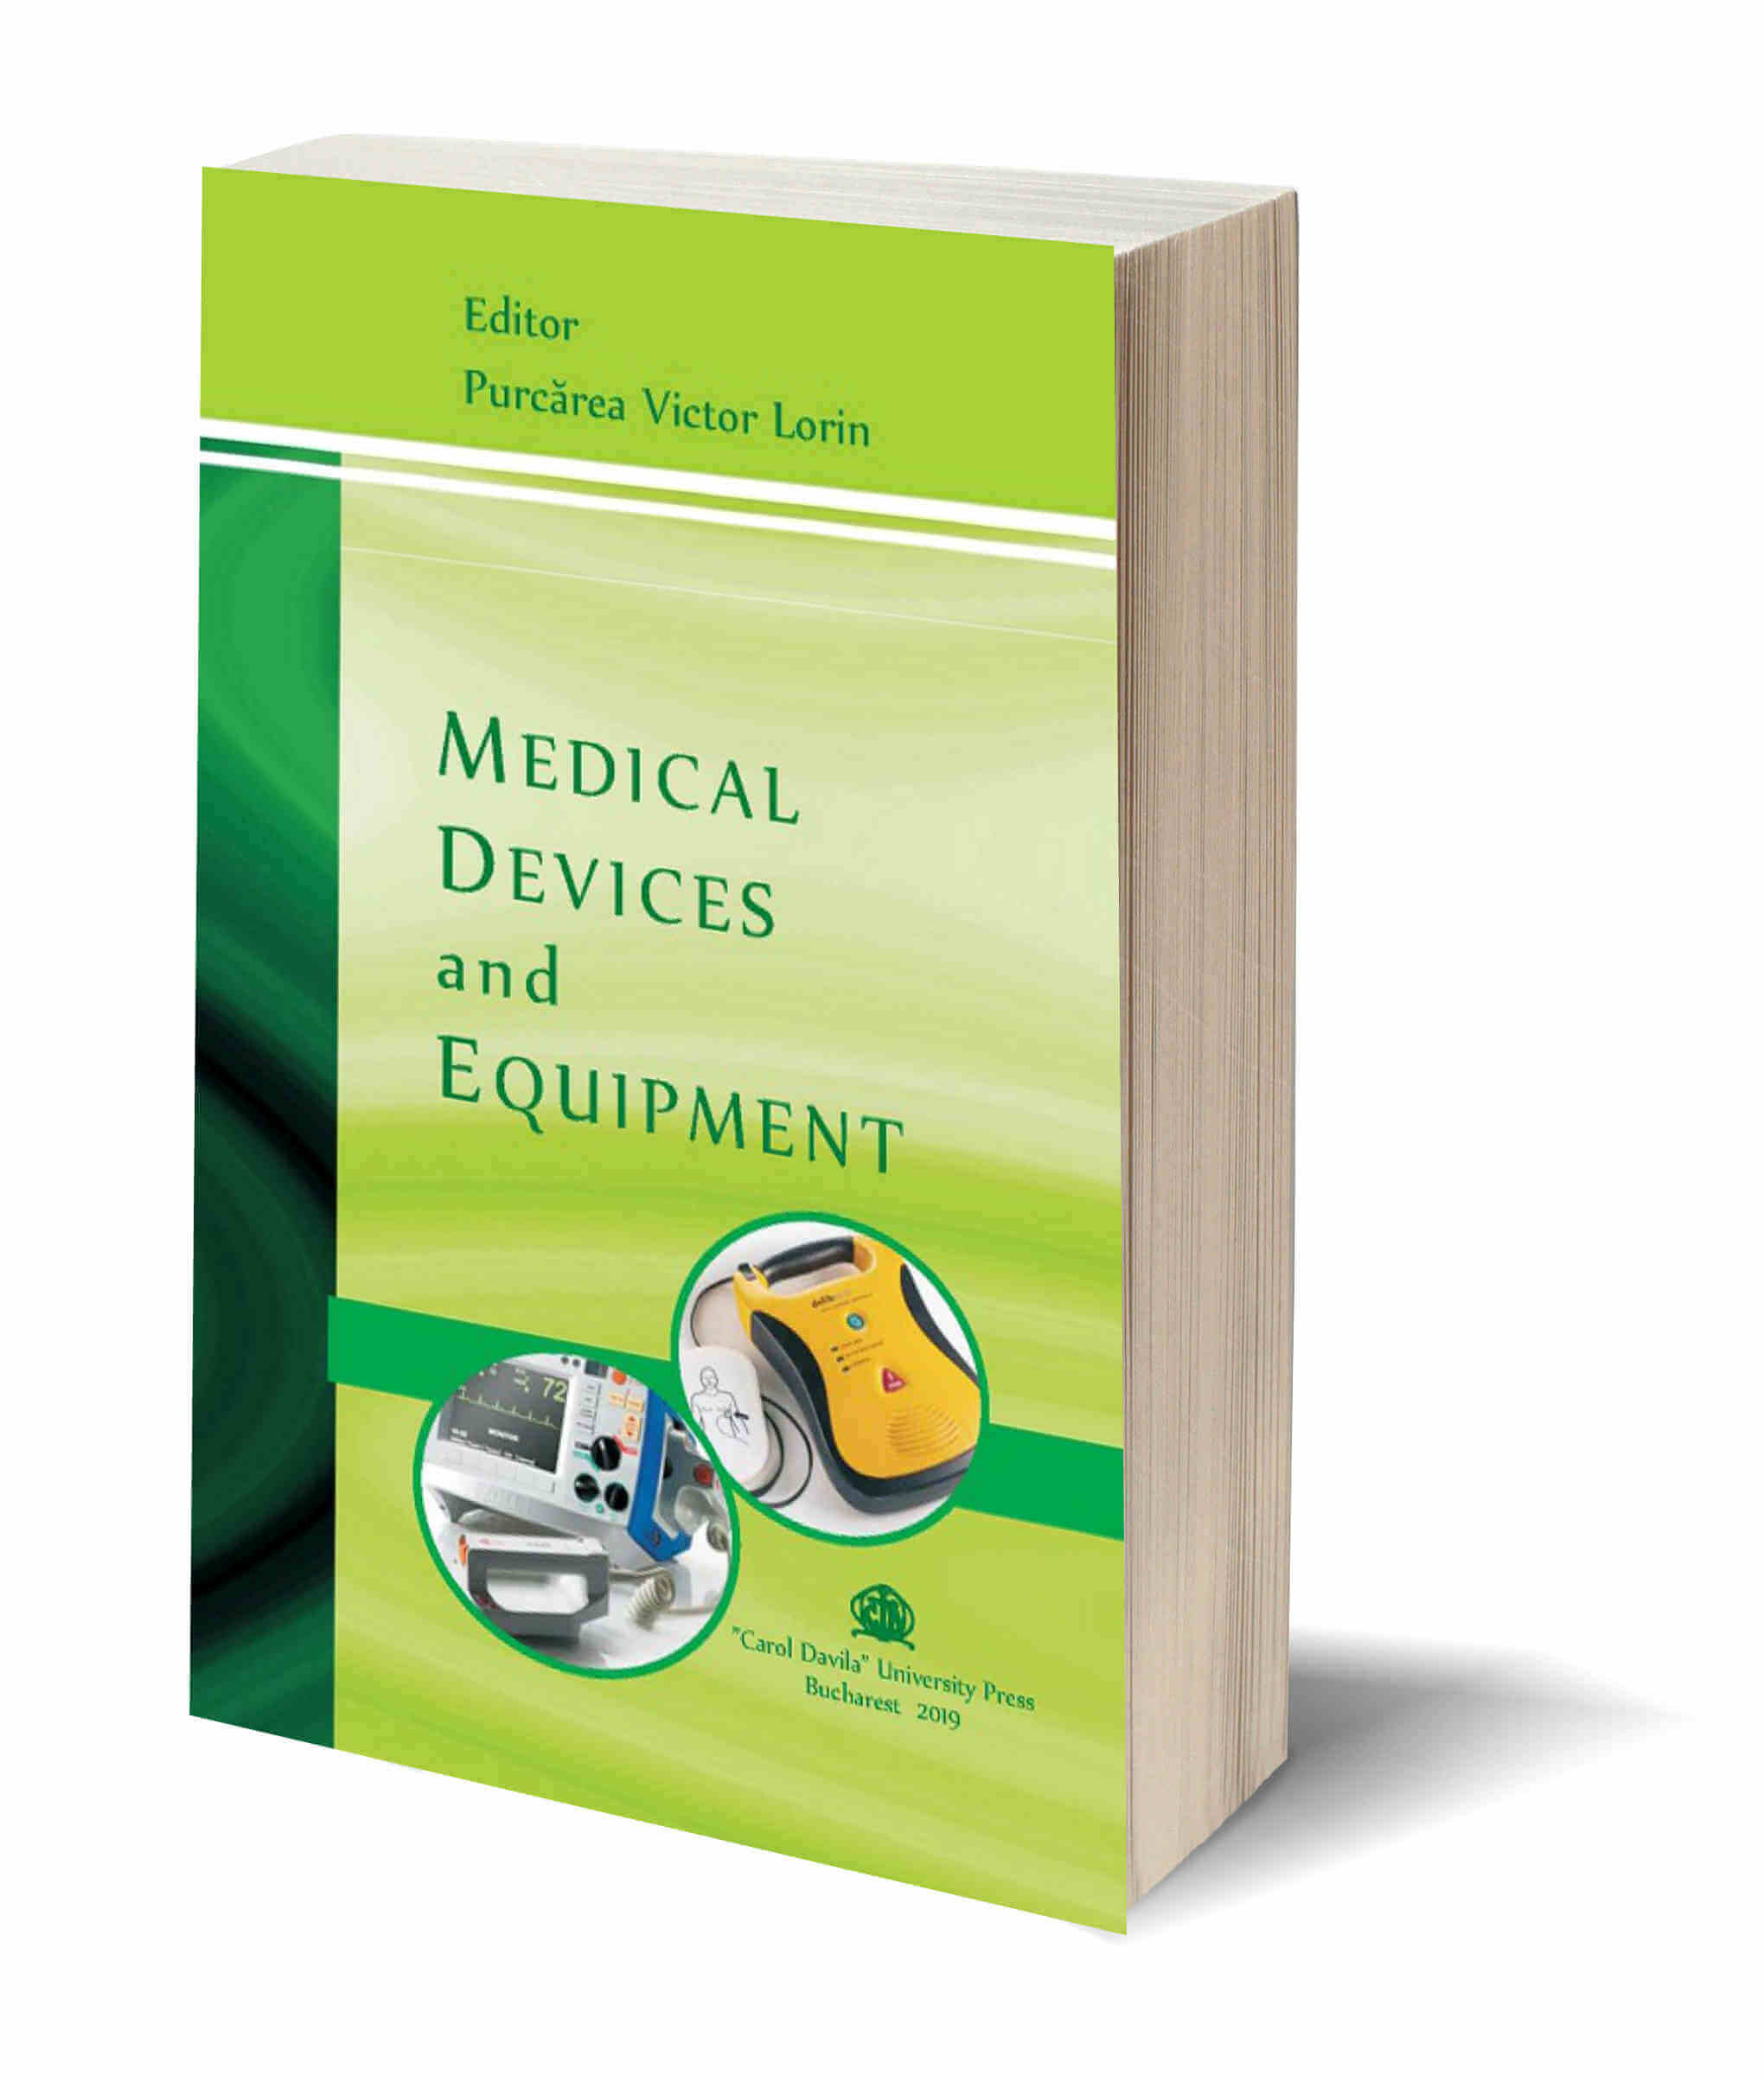 Medical devices and equipment